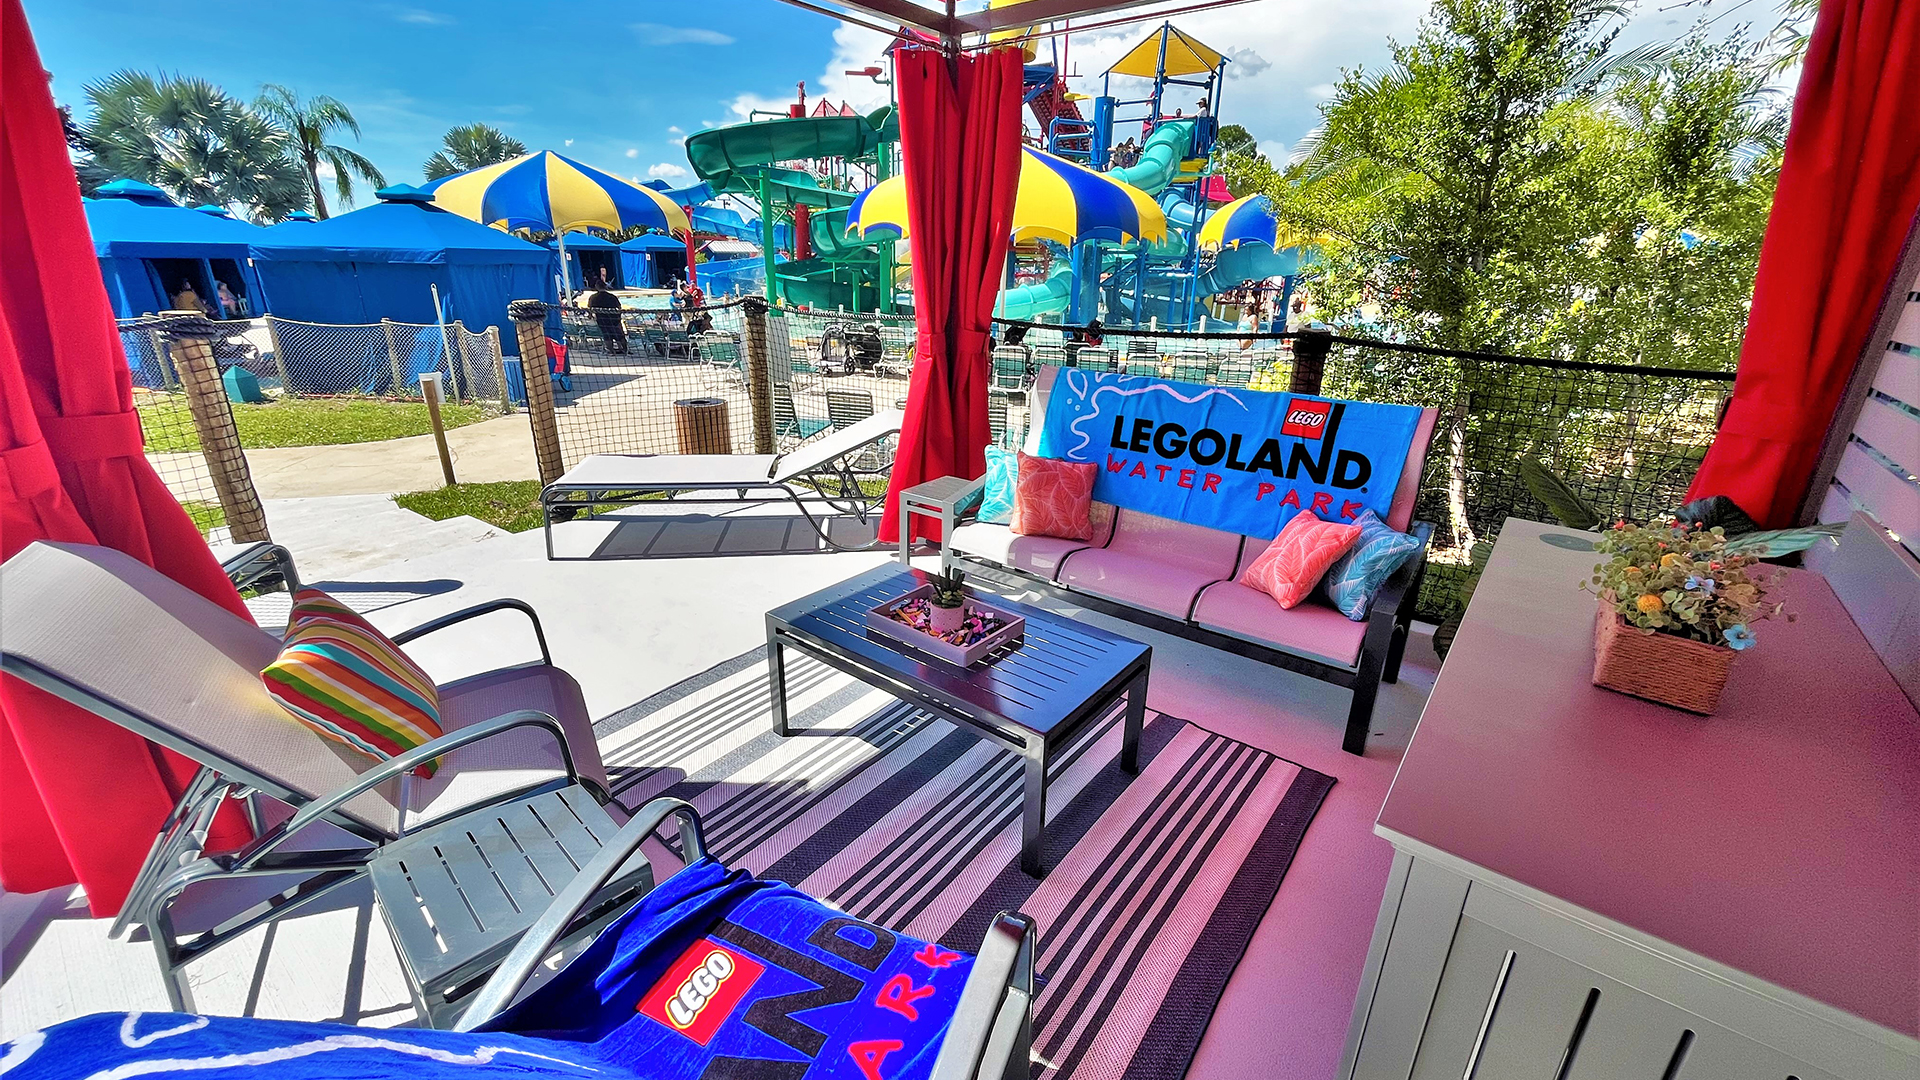 Relax in a Deluxe Cabana at the LEGOLAND Florida Water Park